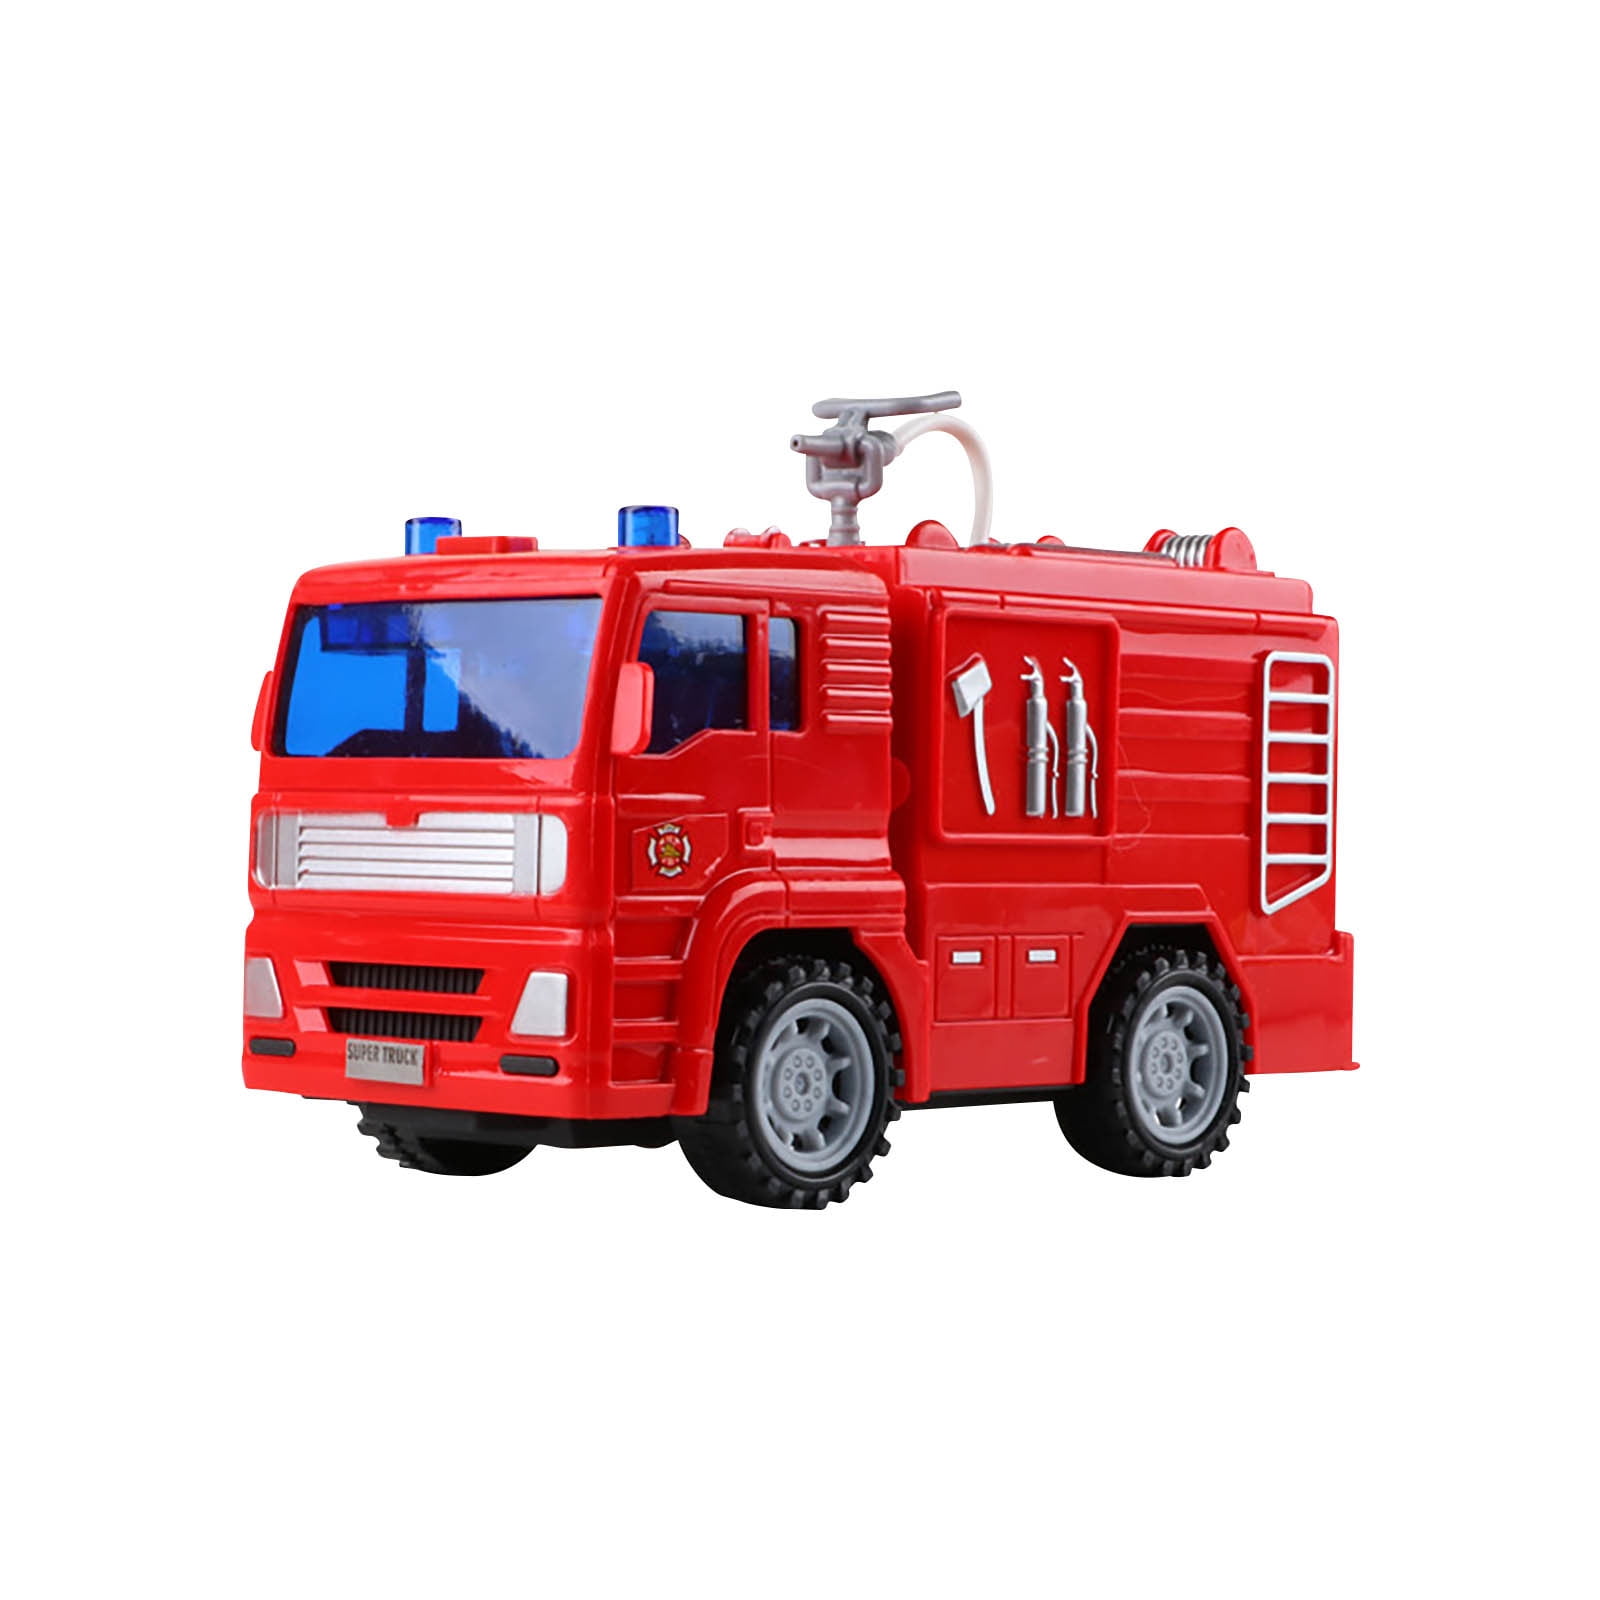 QISIWOLE Big Fire Truck Toy with Lights, Sounds, Sirens, 360